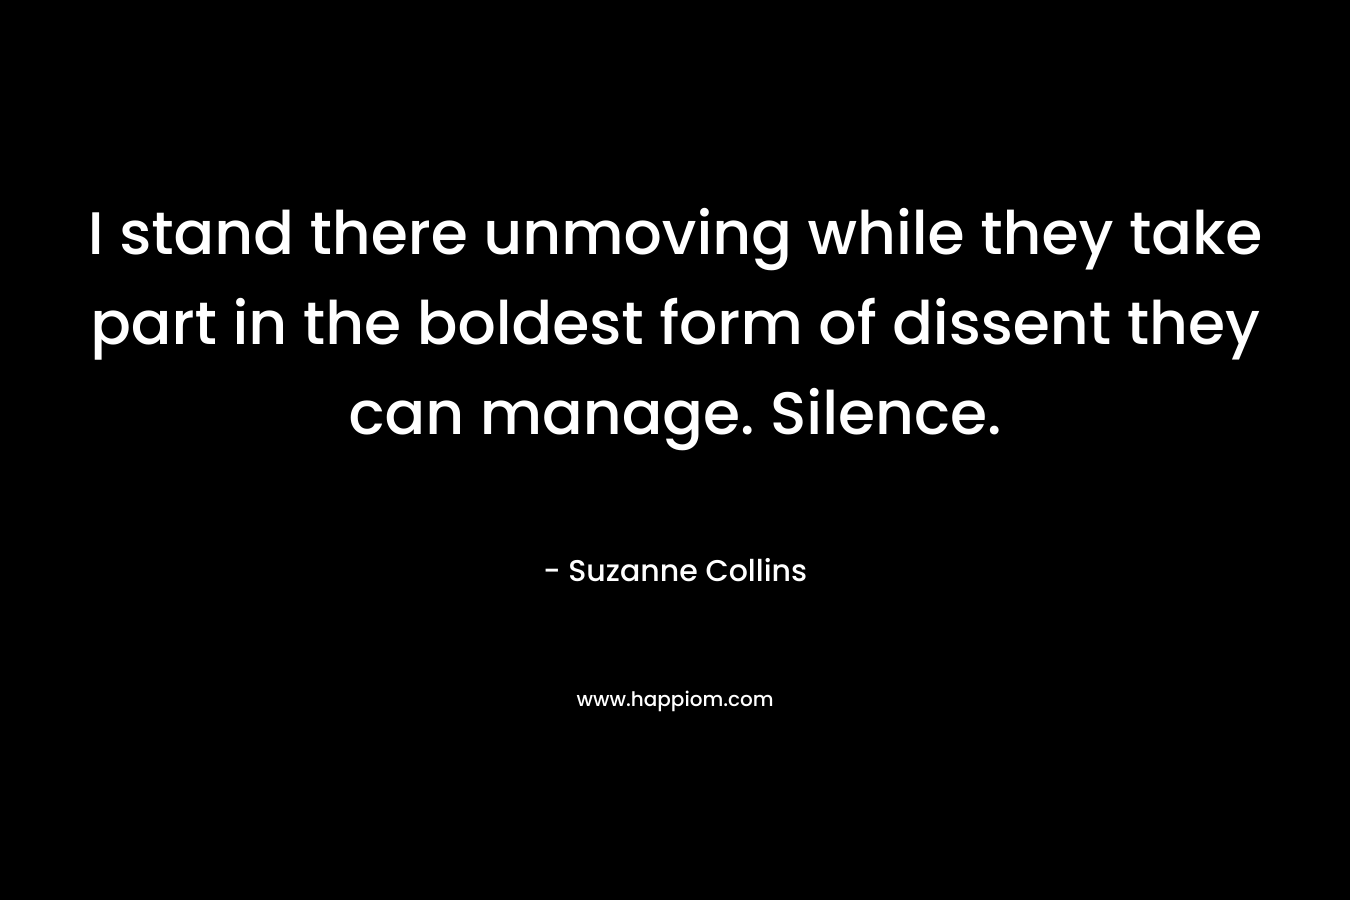 I stand there unmoving while they take part in the boldest form of dissent they can manage. Silence.